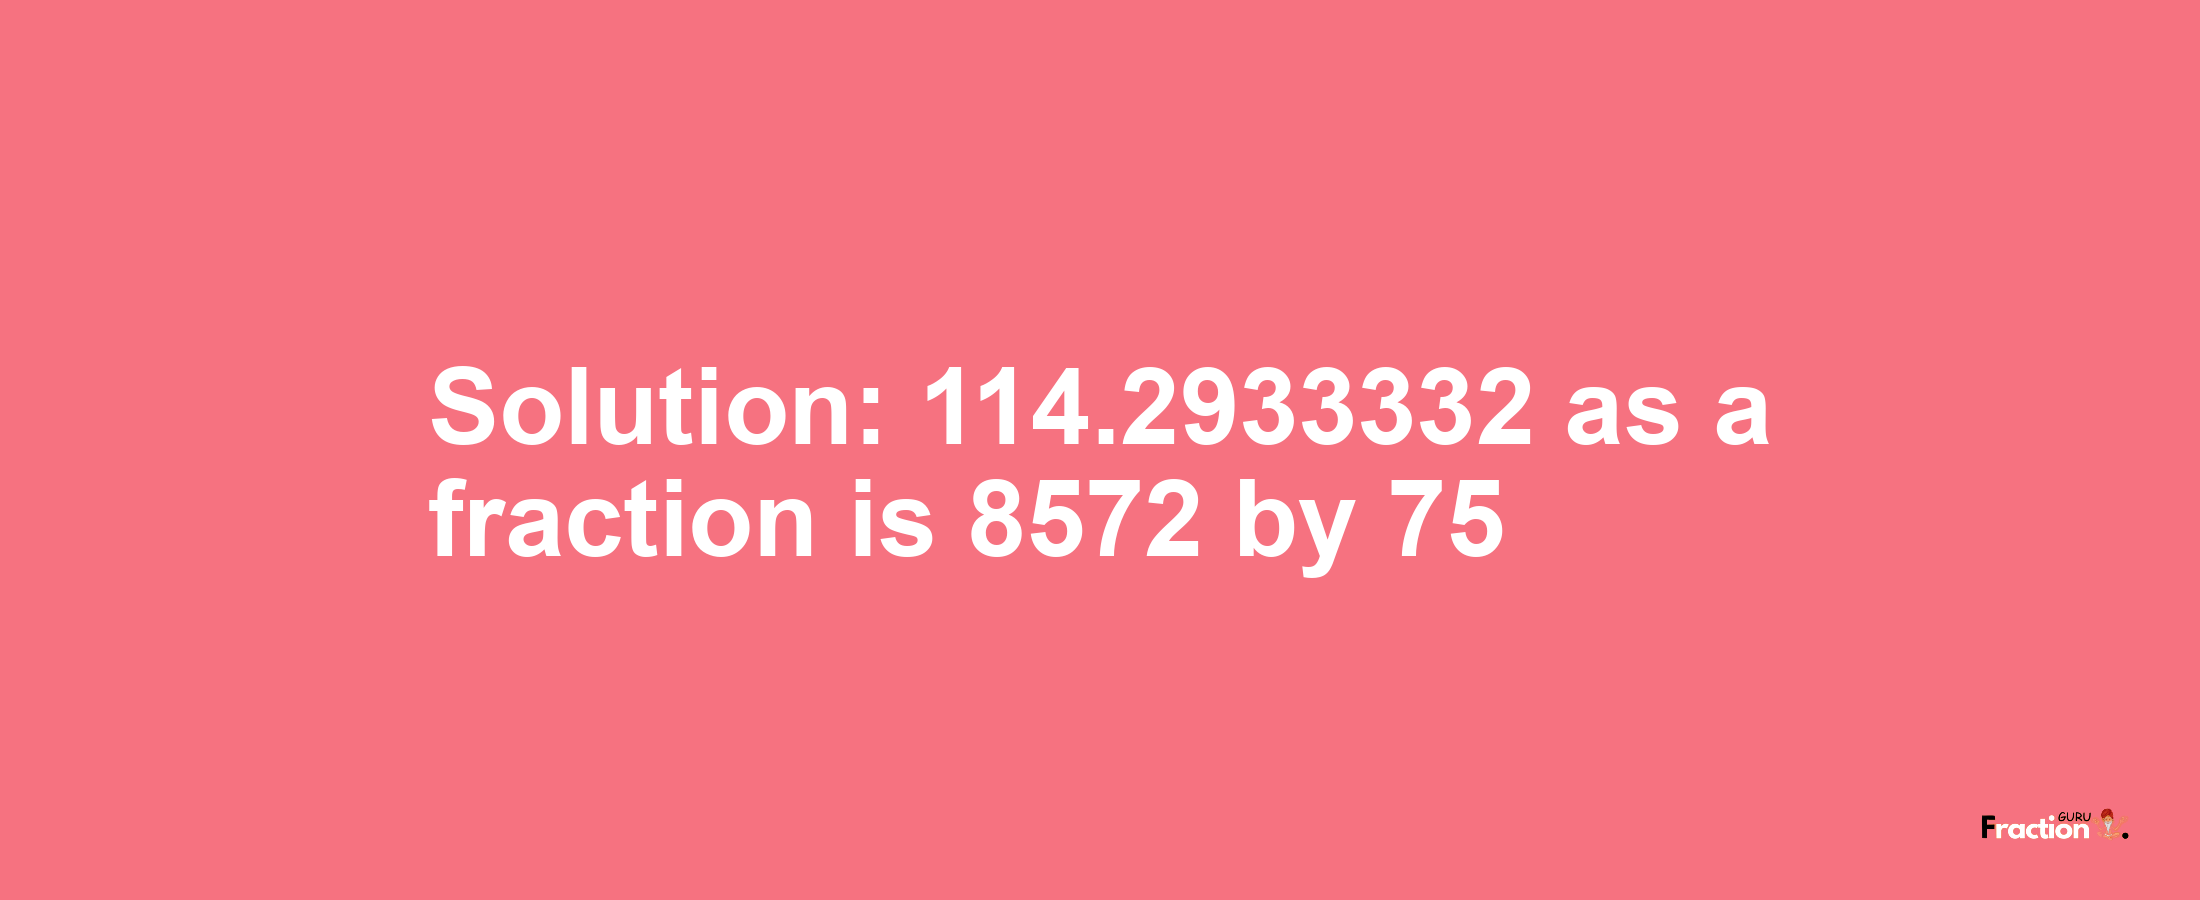 Solution:114.2933332 as a fraction is 8572/75